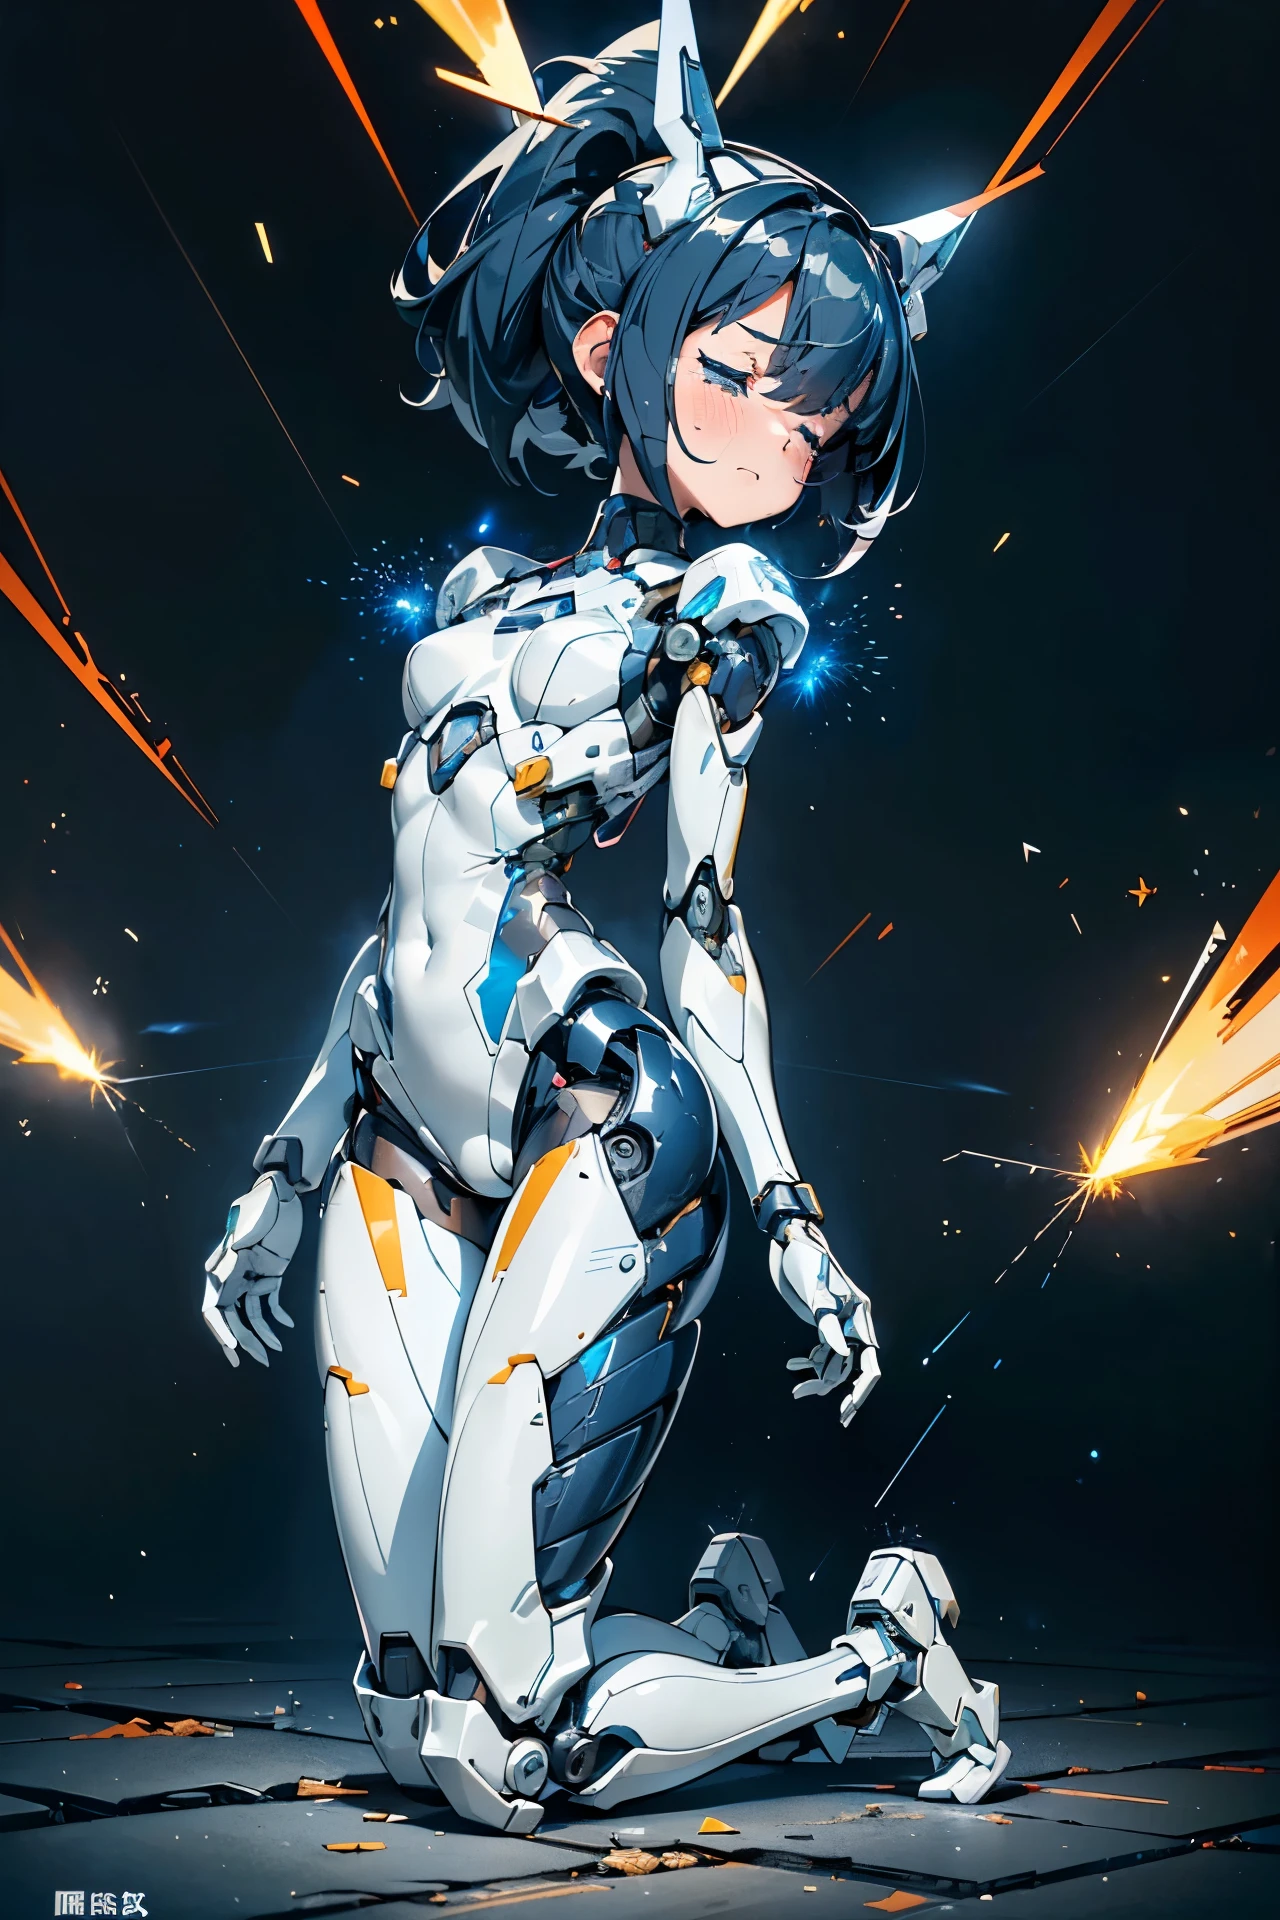 (((masterpiece))), Girl Robot, (loli:1.4), (Gamine:1.5), (Streamlined body based on pure white1.4), White and navy see-through pilot suit, White and navy blue see-through tight-fitting clothing, White and navy blue thigh cover pants, White and navy blue shoulder cover clothes, White and navy blue shiny clothes, Navy blue tight-fitting pants that hide the legs, (body disassembled into pieces:1.4), (There are many cracks and scratches on the body and thighs.:1.4), (Machines and cables visible through the gap in the body:1.4), (My body overheated and exploded.:1.4), (My overheated body exploded:1.4), (The overheated body emitted a large amount of sparks and exploded.:1.4), (本My body overheated and exploded.:1.2), (A body completely destroyed:1.5), (The torso exploded、A large amount of sparks come out from the cracks in the torso and from the mouth.:1.4), (Mouth open:1.4), (Both eyes are closed:1.4), (Close both eyes:1.4), (Crying hard:1.4), (Dark blue hair ponytail:1.4), (Get down on both knees:1.4), (Mechanical joints:1.4), (Machine body:1.4), (From Side:1.3), (Looking away:1.3), mecha musume, Mechanical parts, Robot joints, Headgear